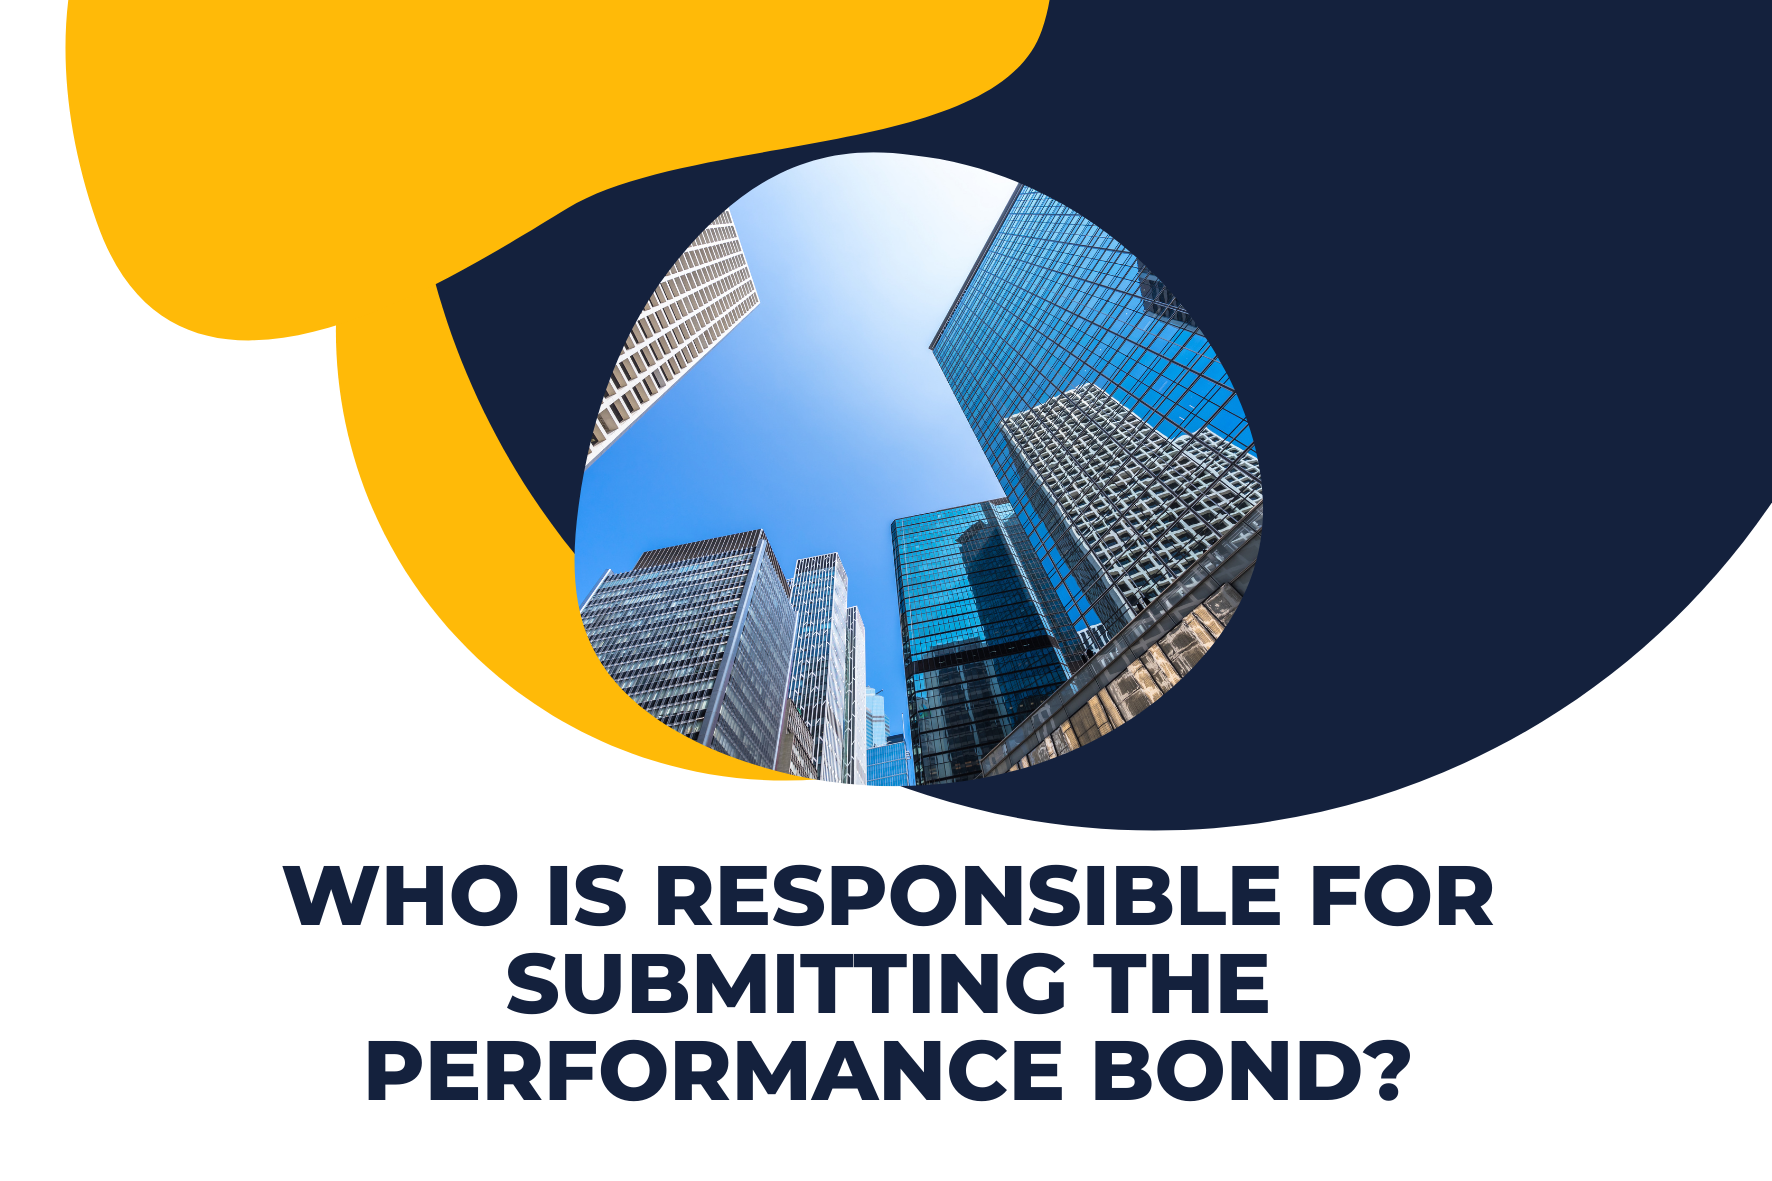 performance bond - who is responsible for submitting the performance bond - building in blue and yellow background